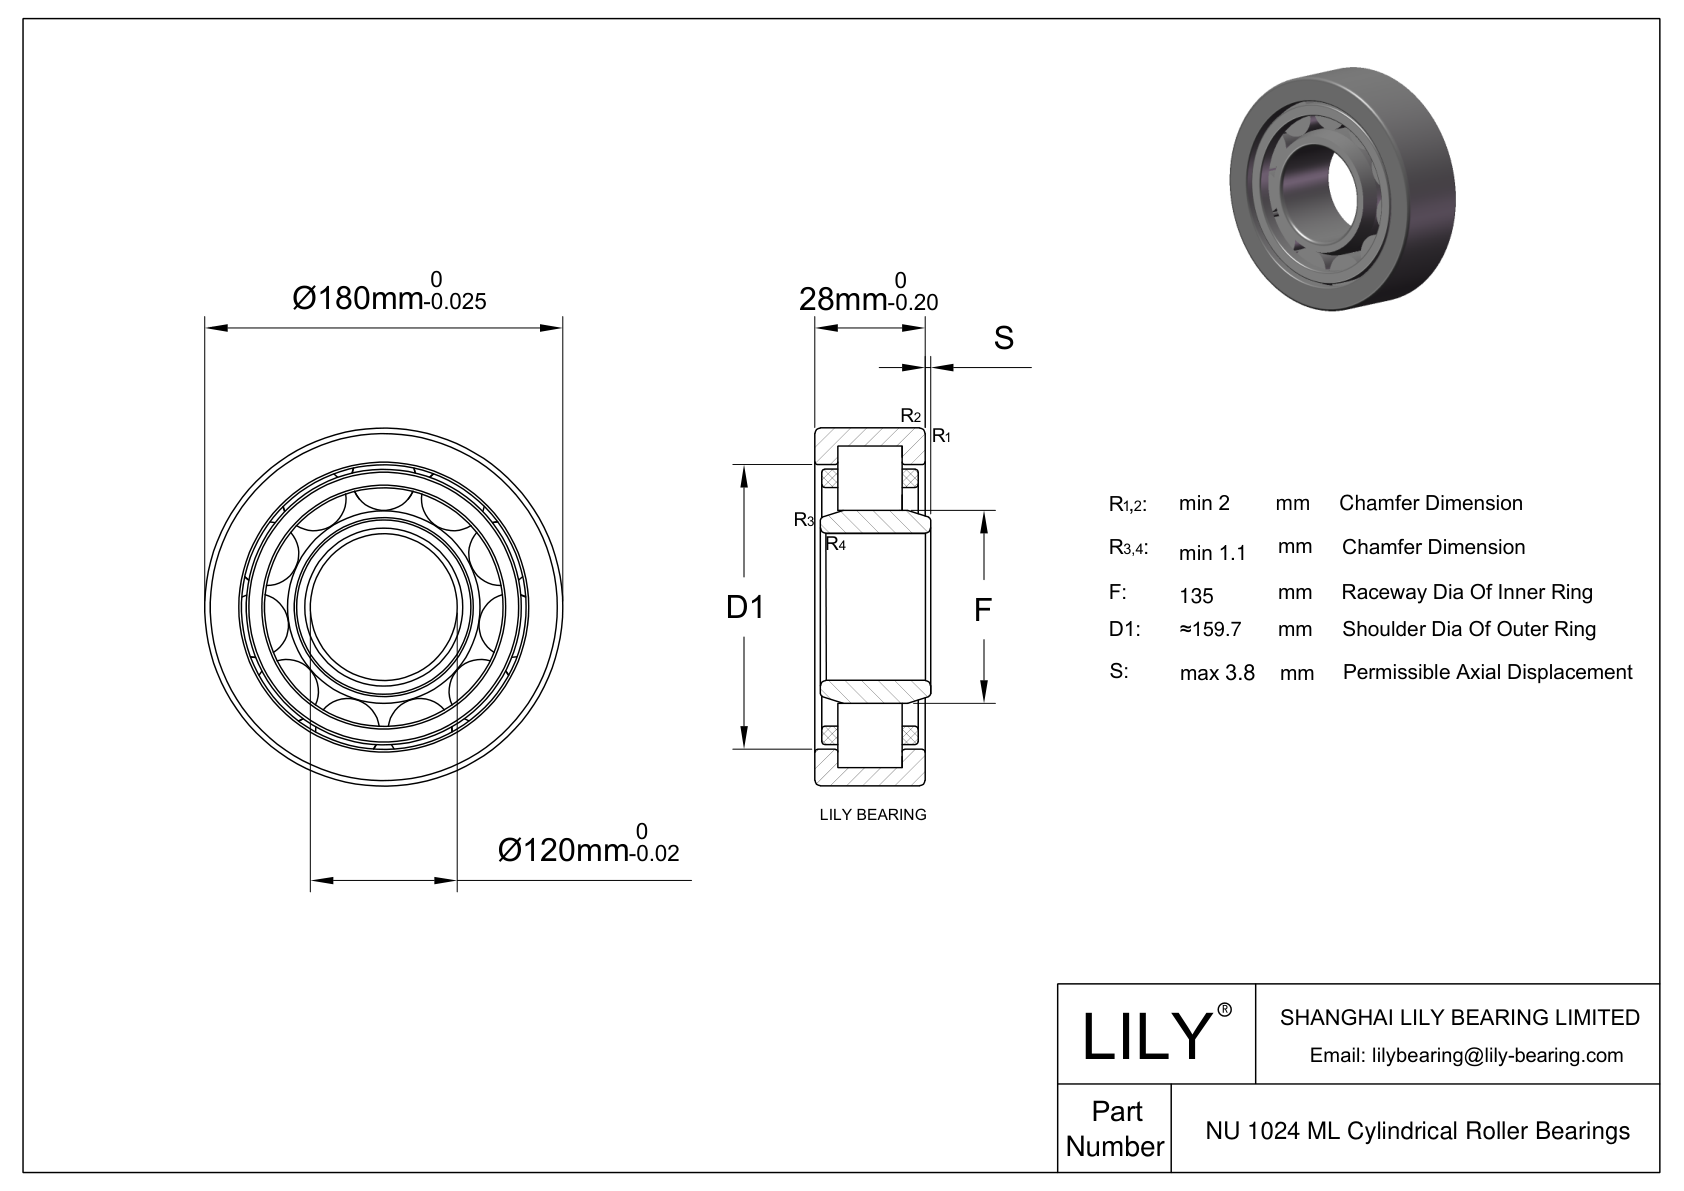 NU 1024 M/C3VL2071 Ceramic Coated Cylindrical Roller Bearings cad drawing